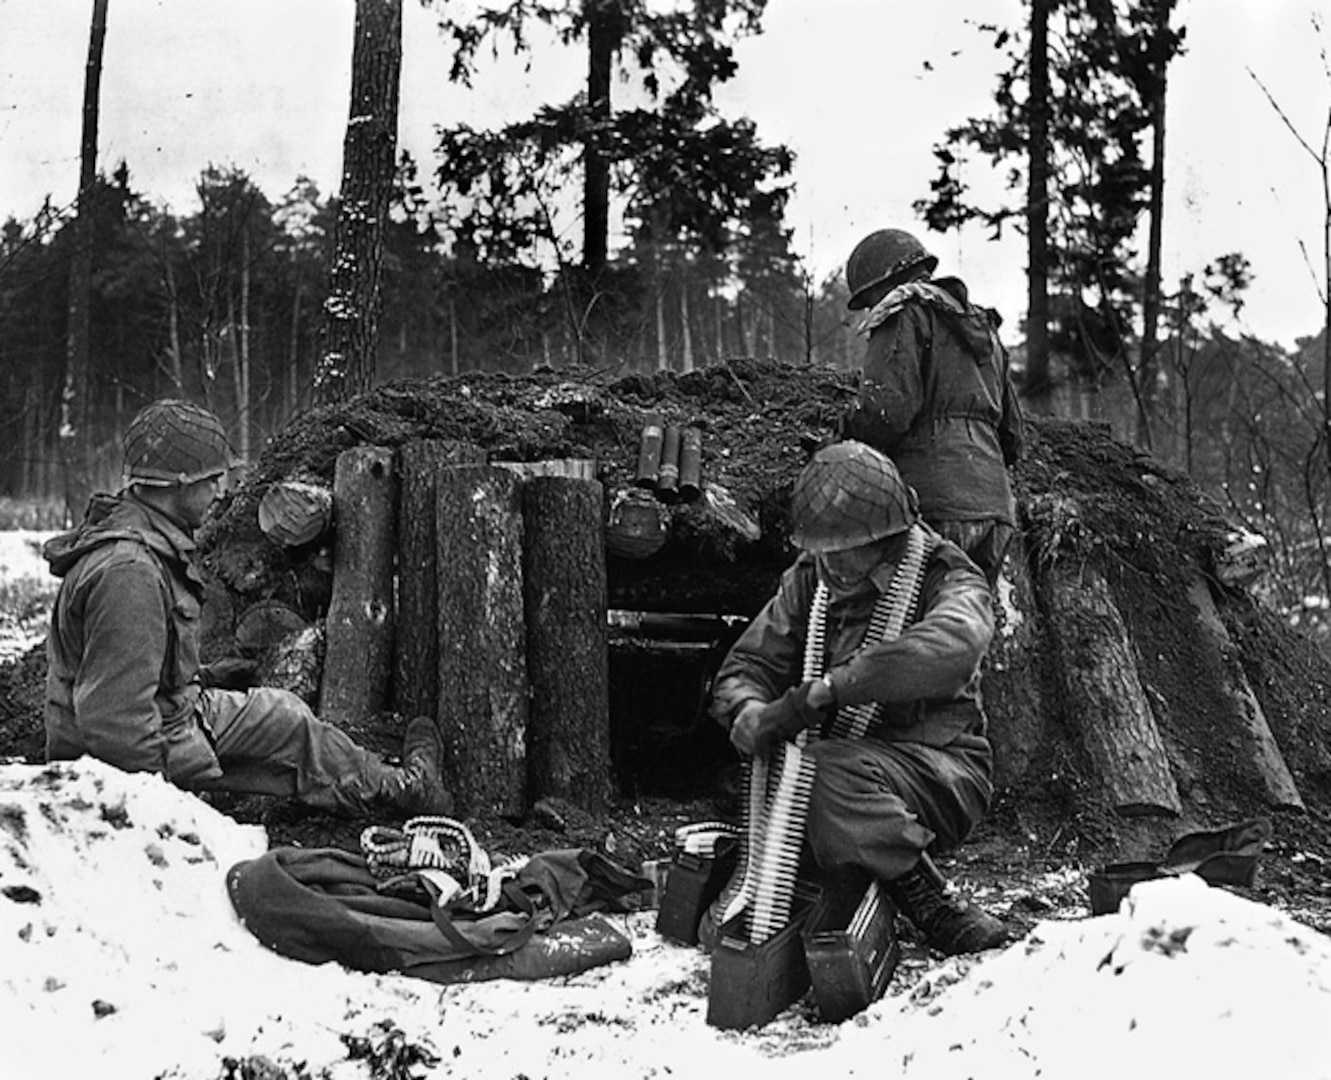 U.S. Army Soldiers of the 42nd Infantry Division prepare a defensive position at their log and dirt bunker near Kauffenheim, France, Jan. 8, 1945. The Soldiers, assigned to Company I, 242nd Regiment, held off the German offensive in Alsace, France, called Operation Nordwind without the division’s artillery or support elements. The actions of one division Soldier, Master Sgt. Vito Bertoldo, were highlighted in the 2018 Netflix documentary “Medal of Honor.”